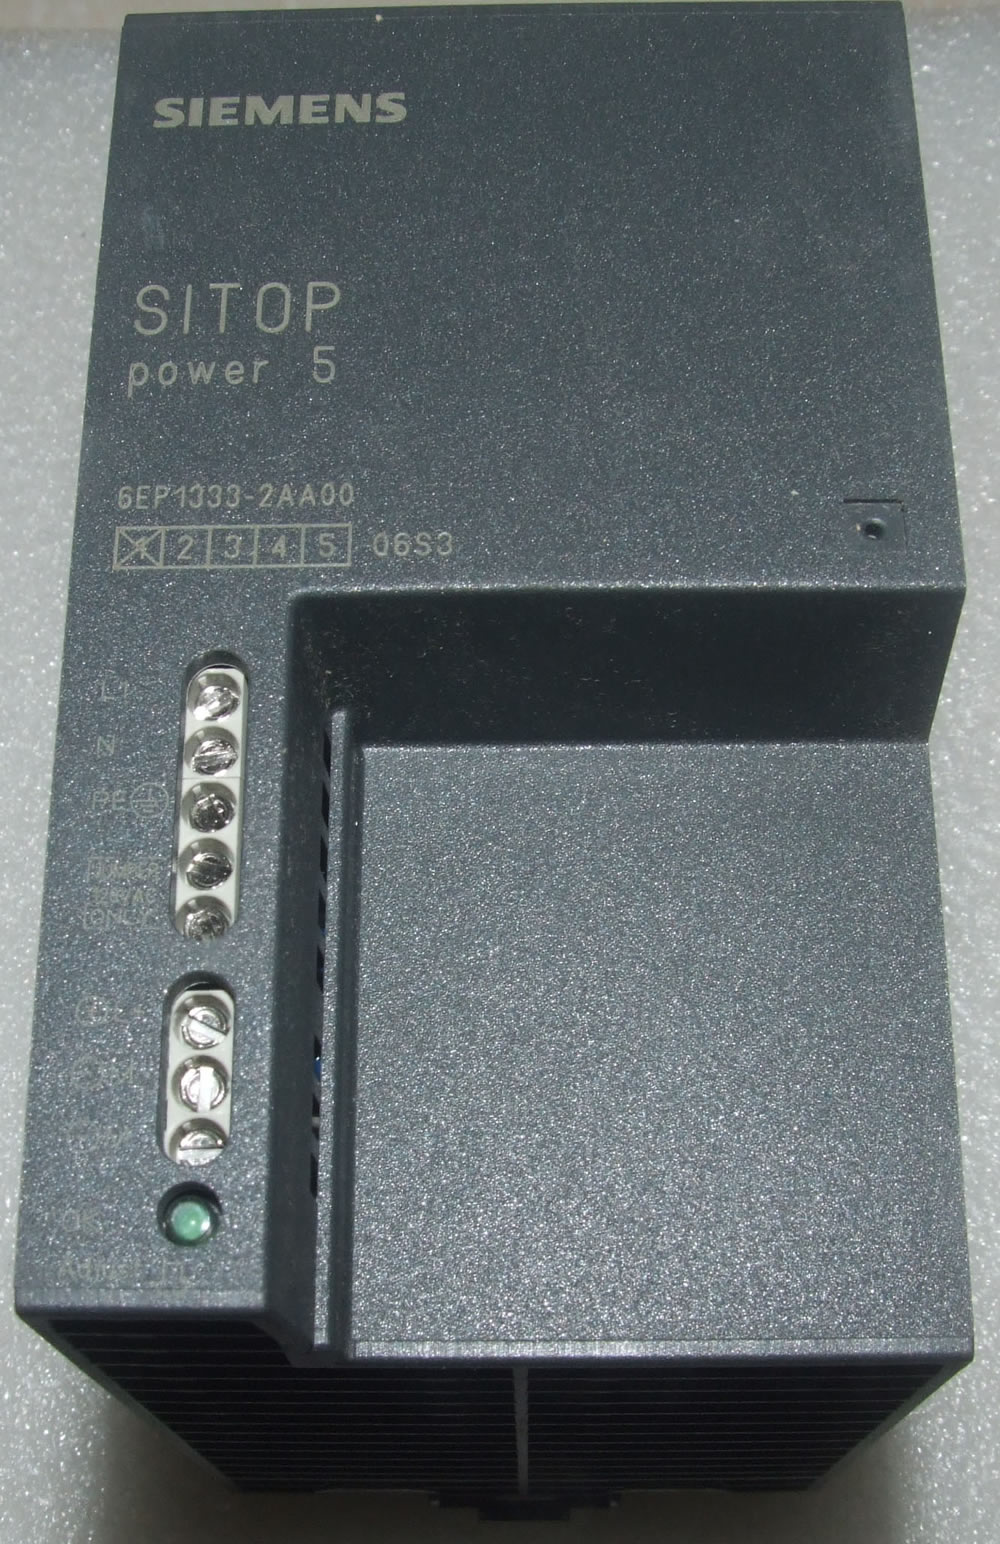 6EP1333-2AA00 SITOP POWER 24 V/5 A